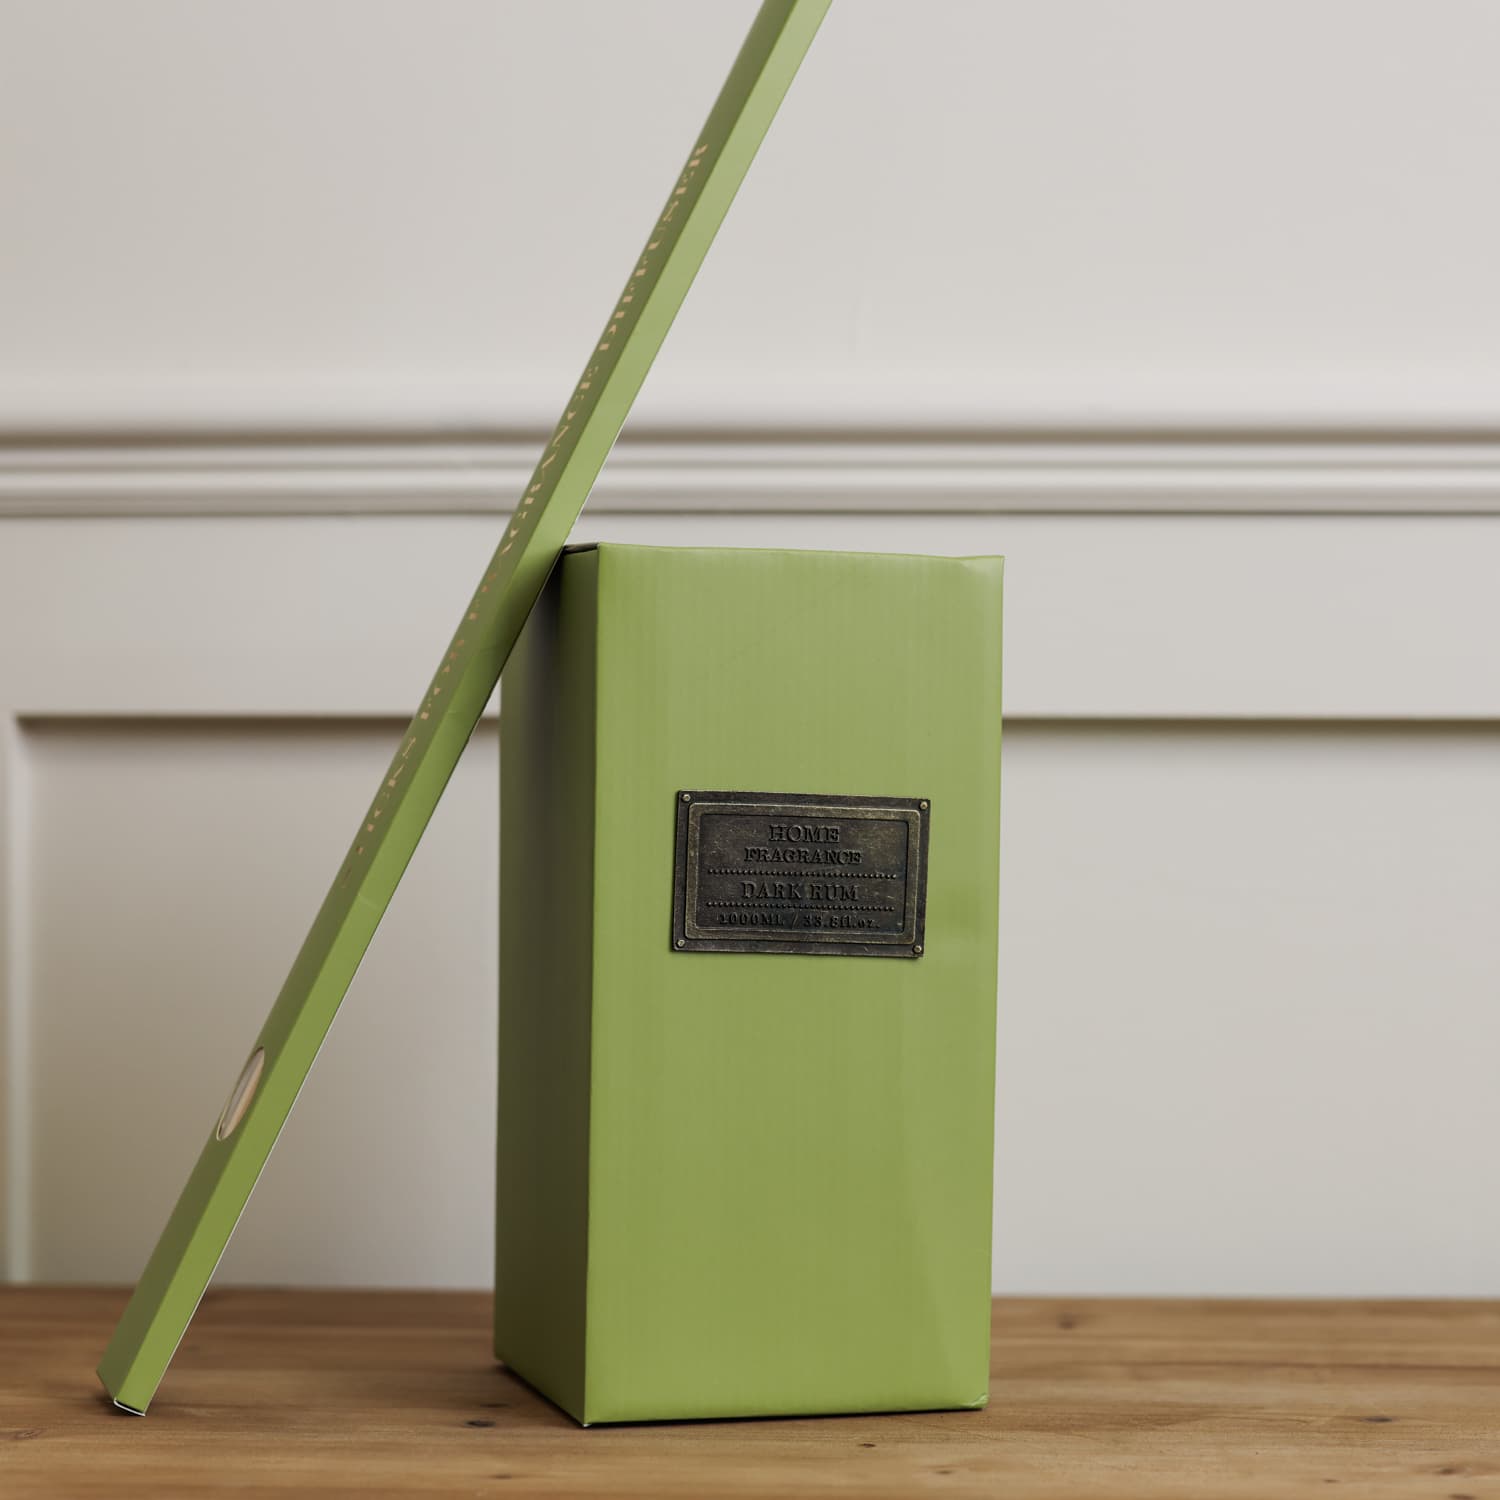 Home fragrance dark rum and lime green reed diffuser presentation box